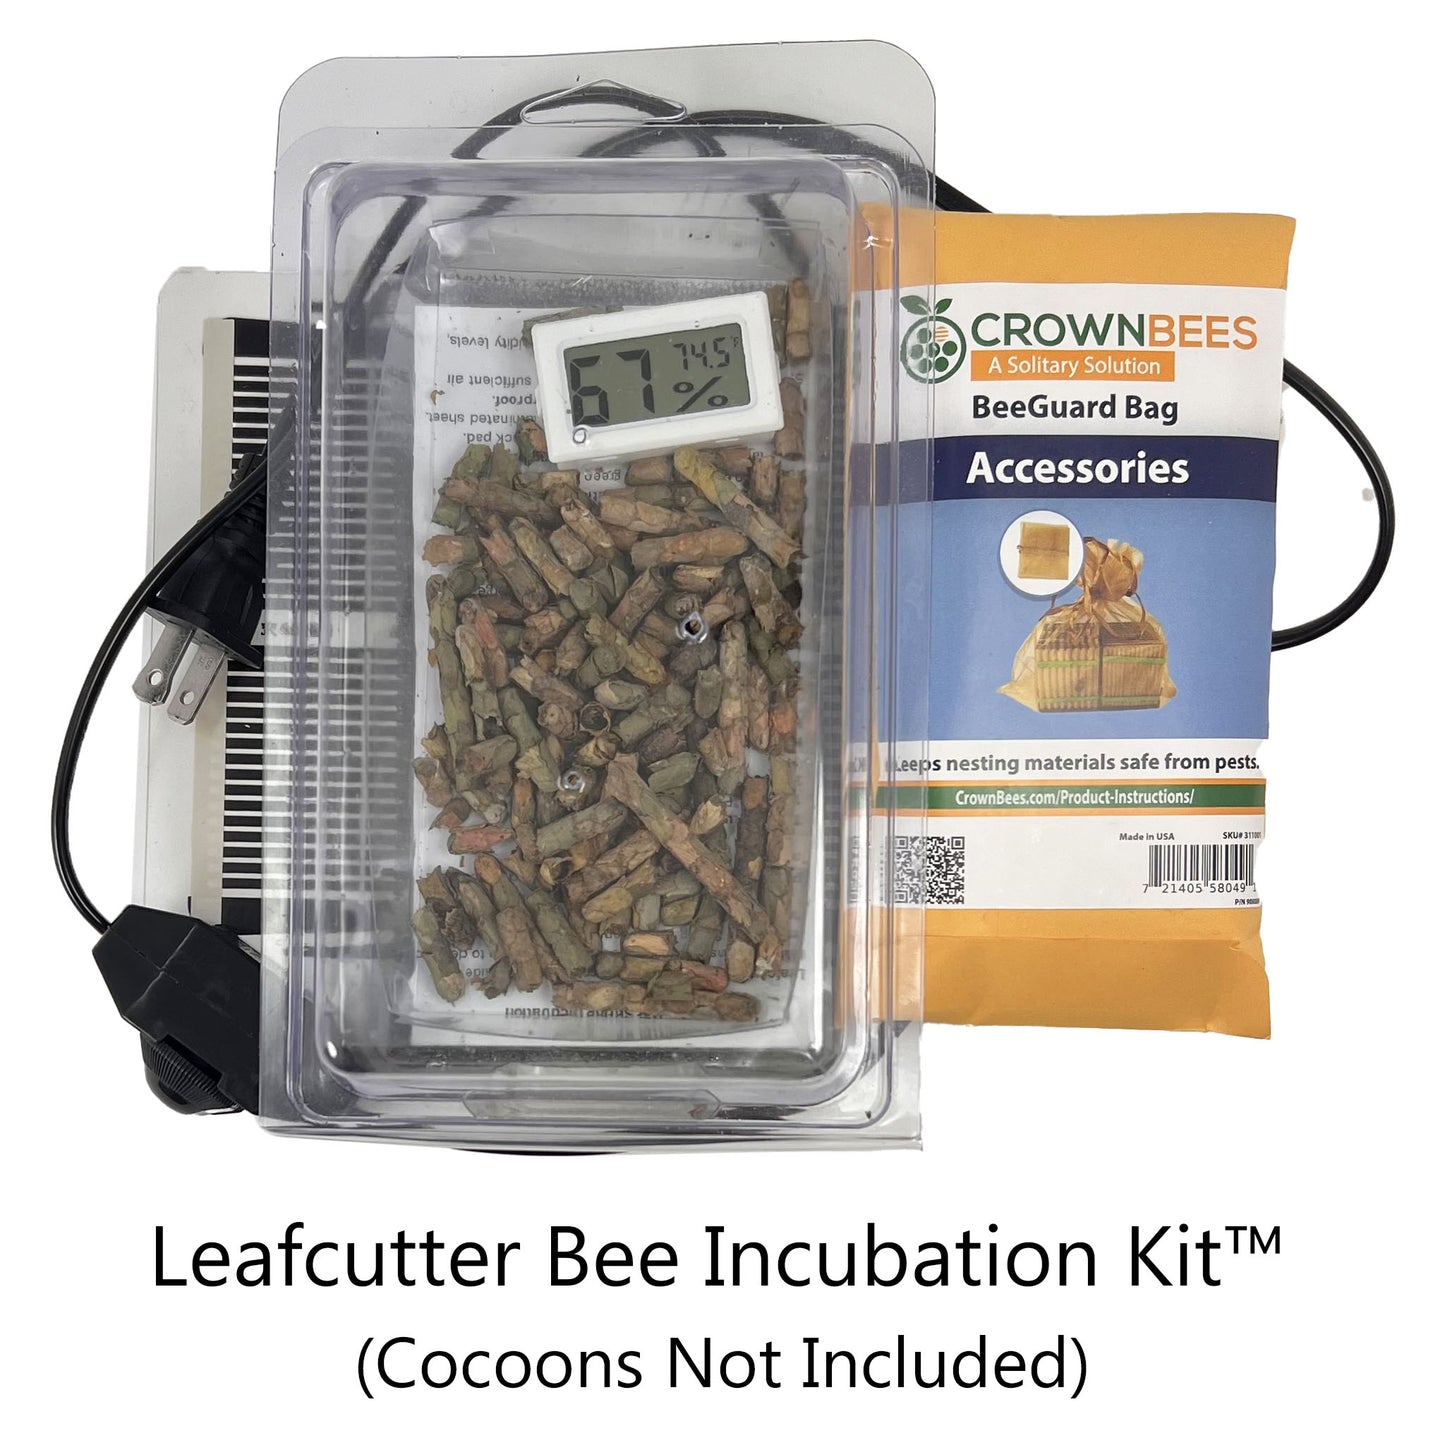 Leafcutter Bee Incubation Kit